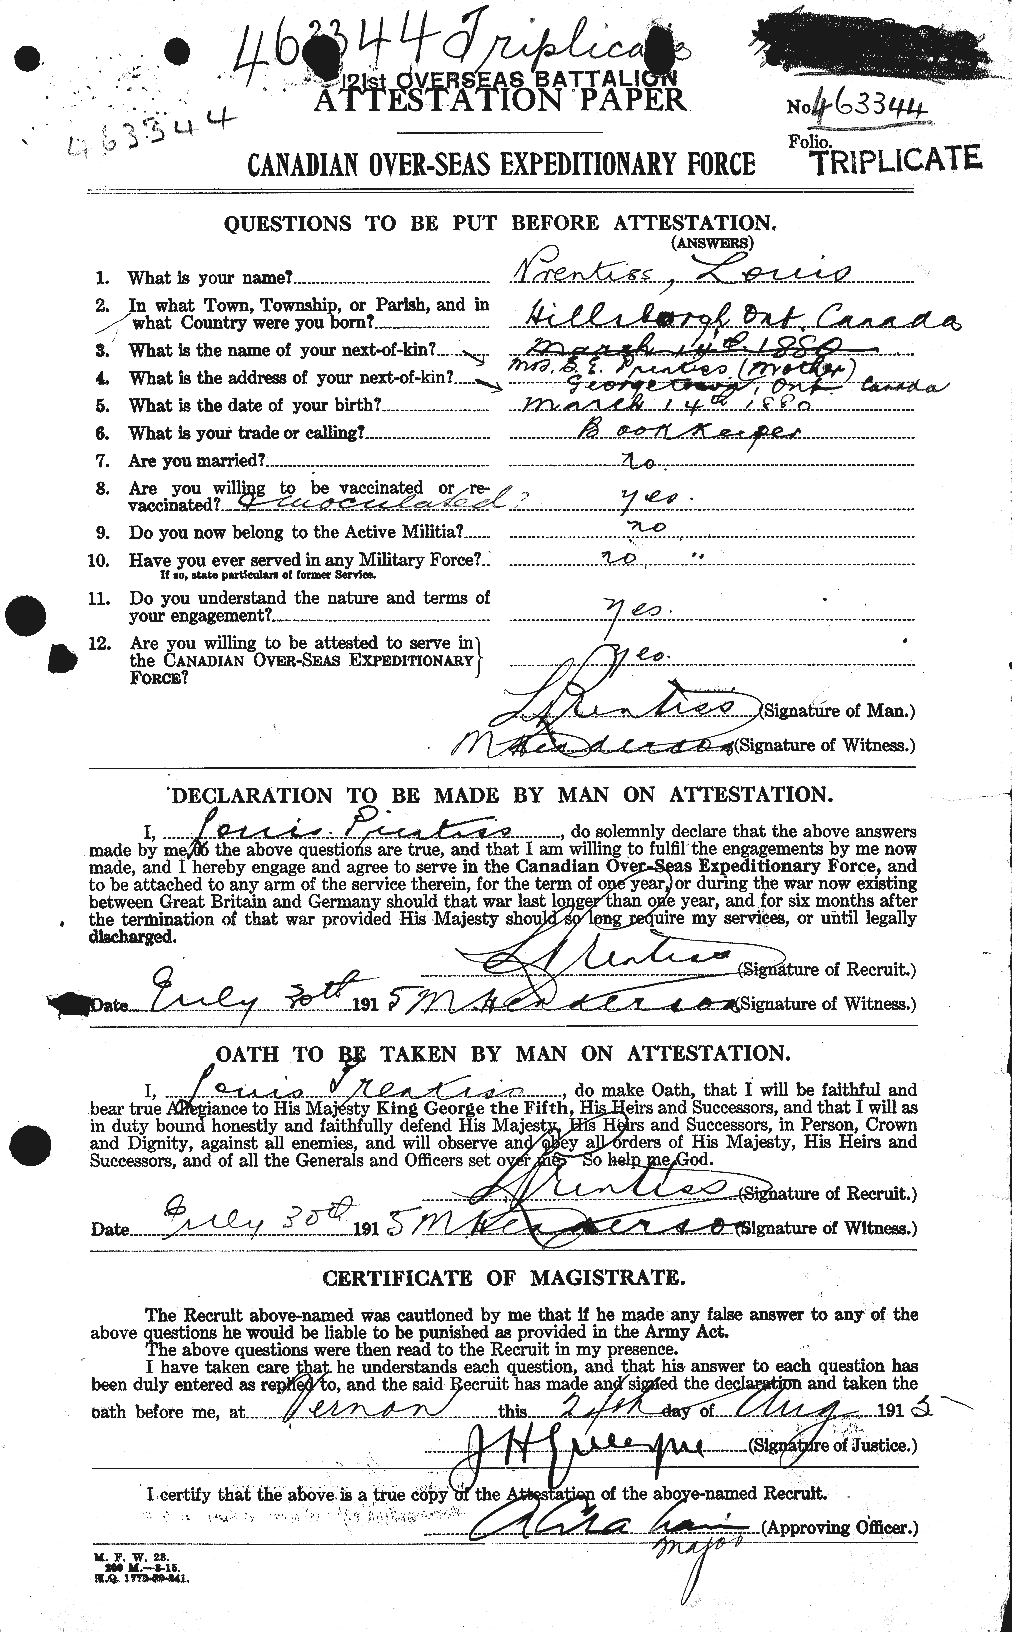 Personnel Records of the First World War - CEF 589689a